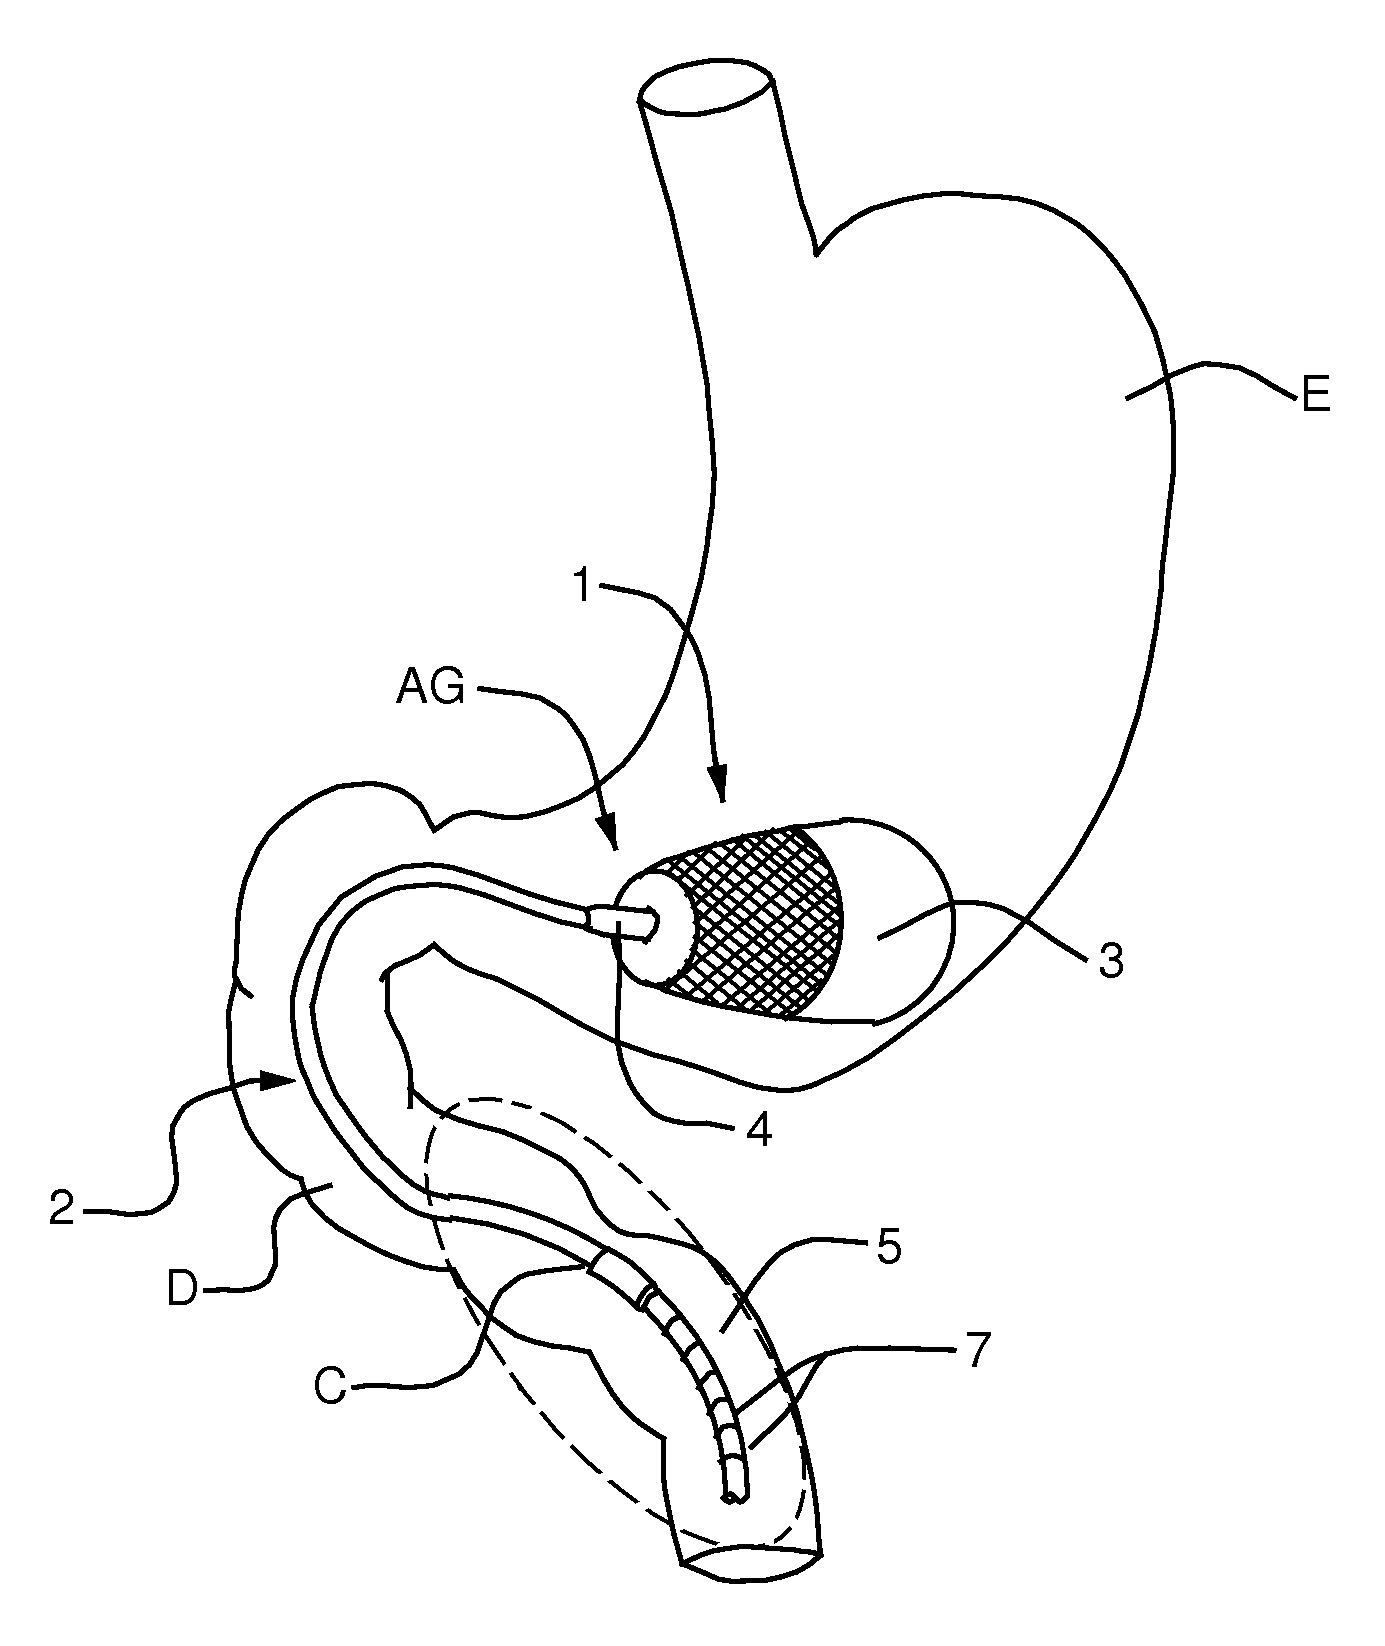 Semi-stationary balloon in the gastric antrum provided with connecting an anchoring rod for inducing weight reduction in human beings